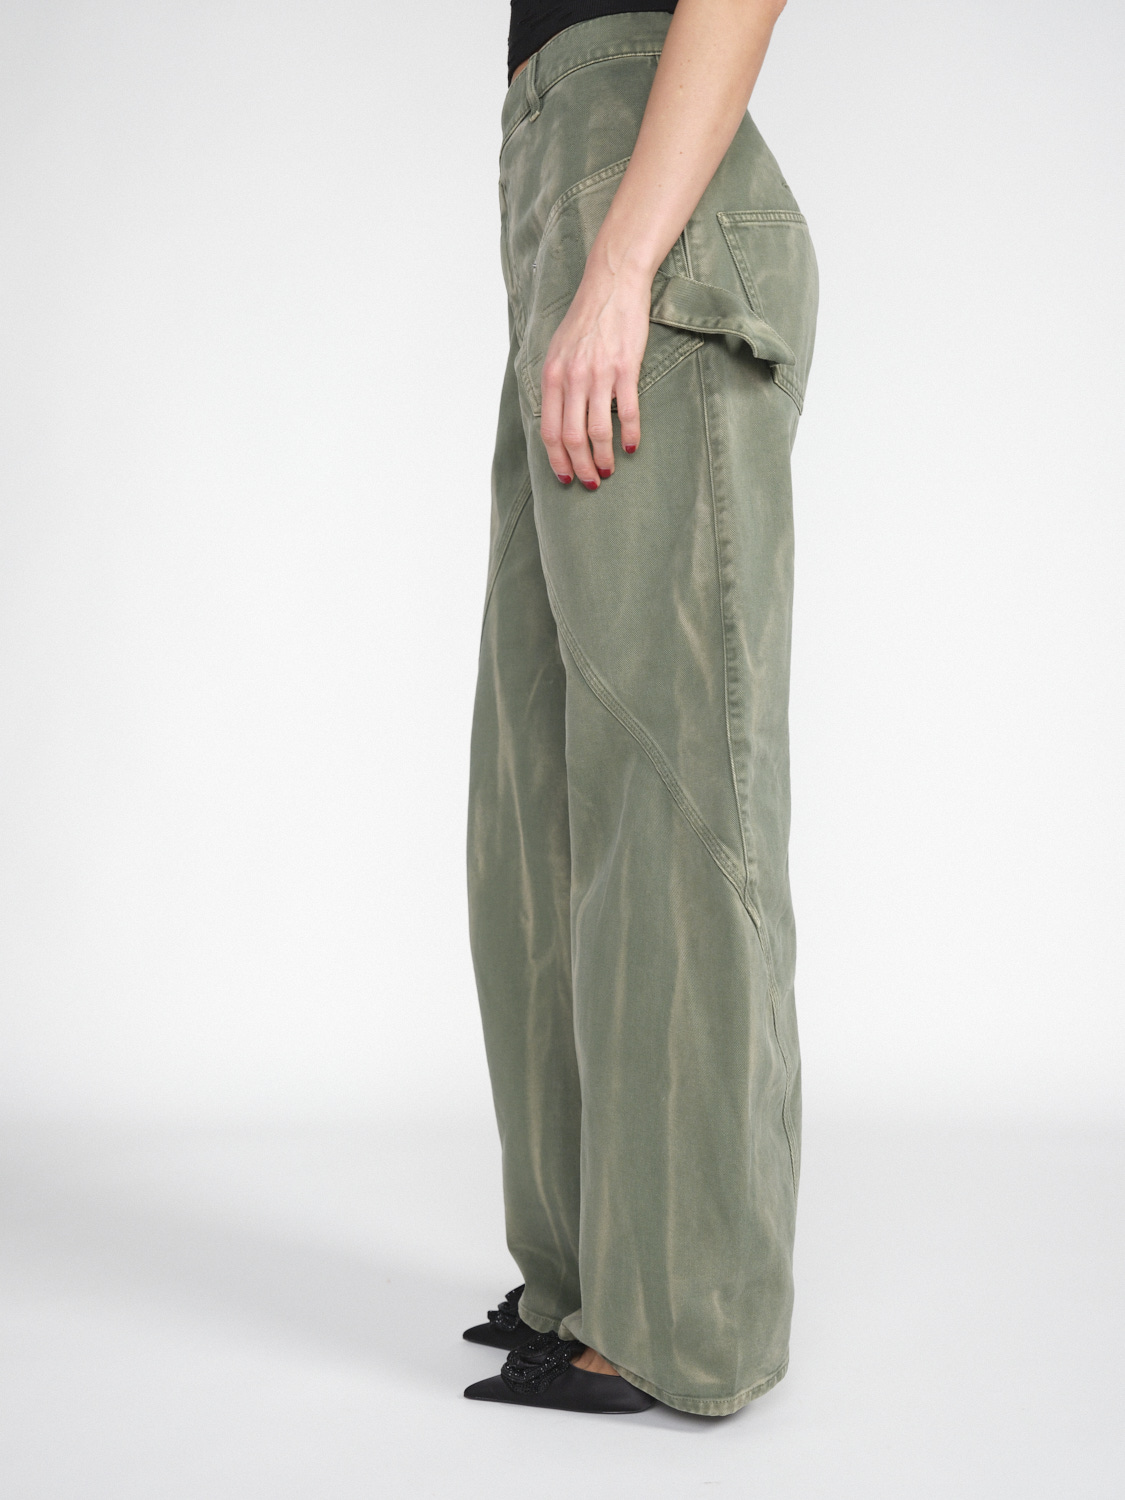 JW Anderson Colored jeans in a worker style made from robust cotton  khaki 26